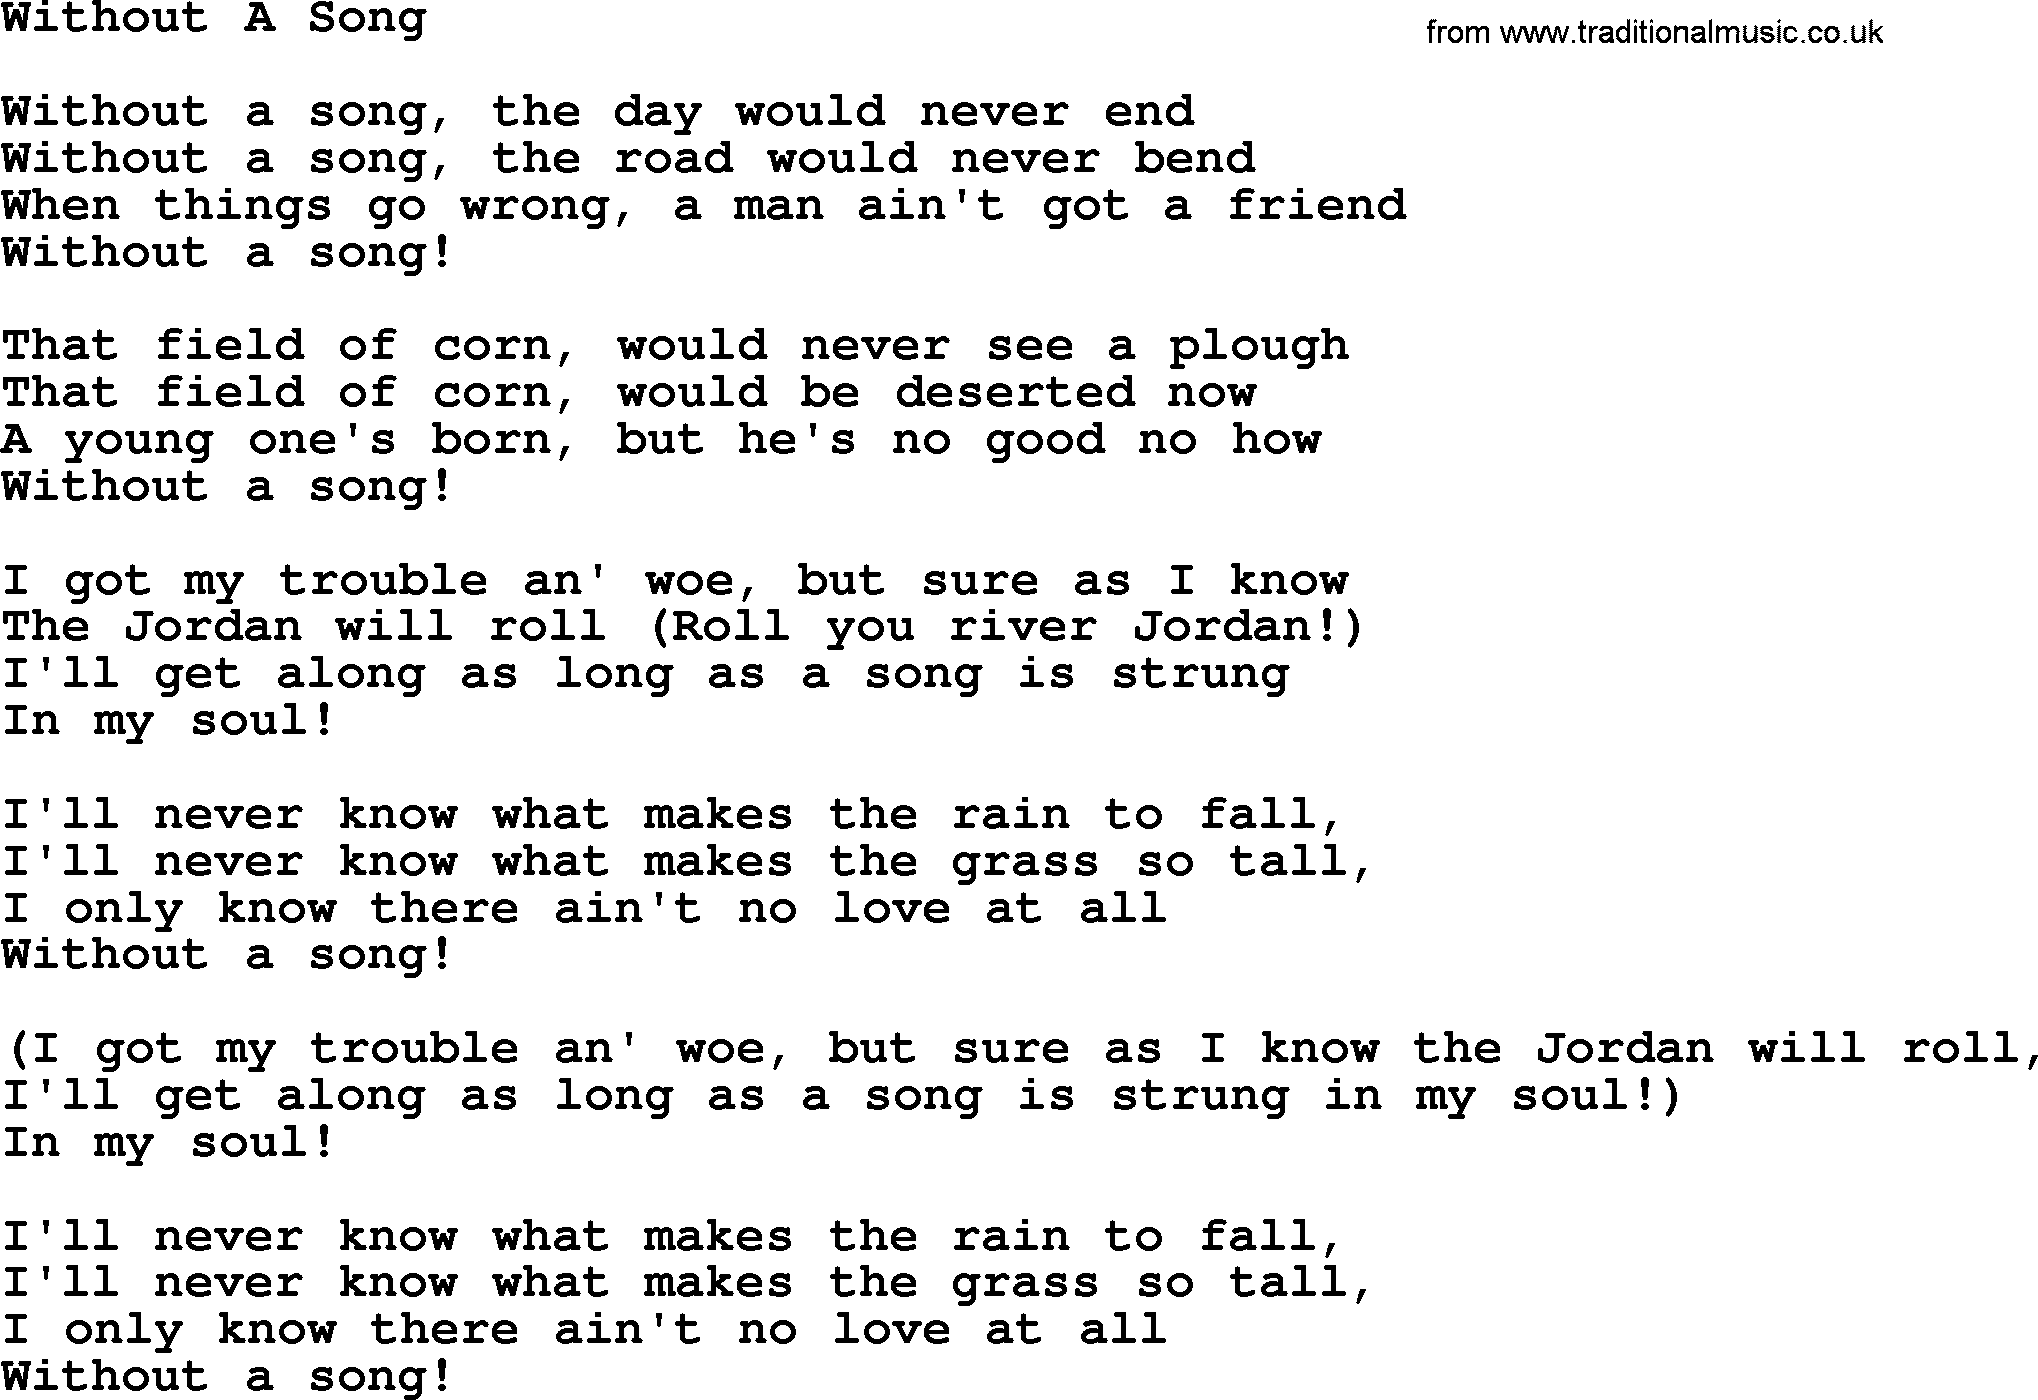 Willie Nelson song: Without A Song lyrics